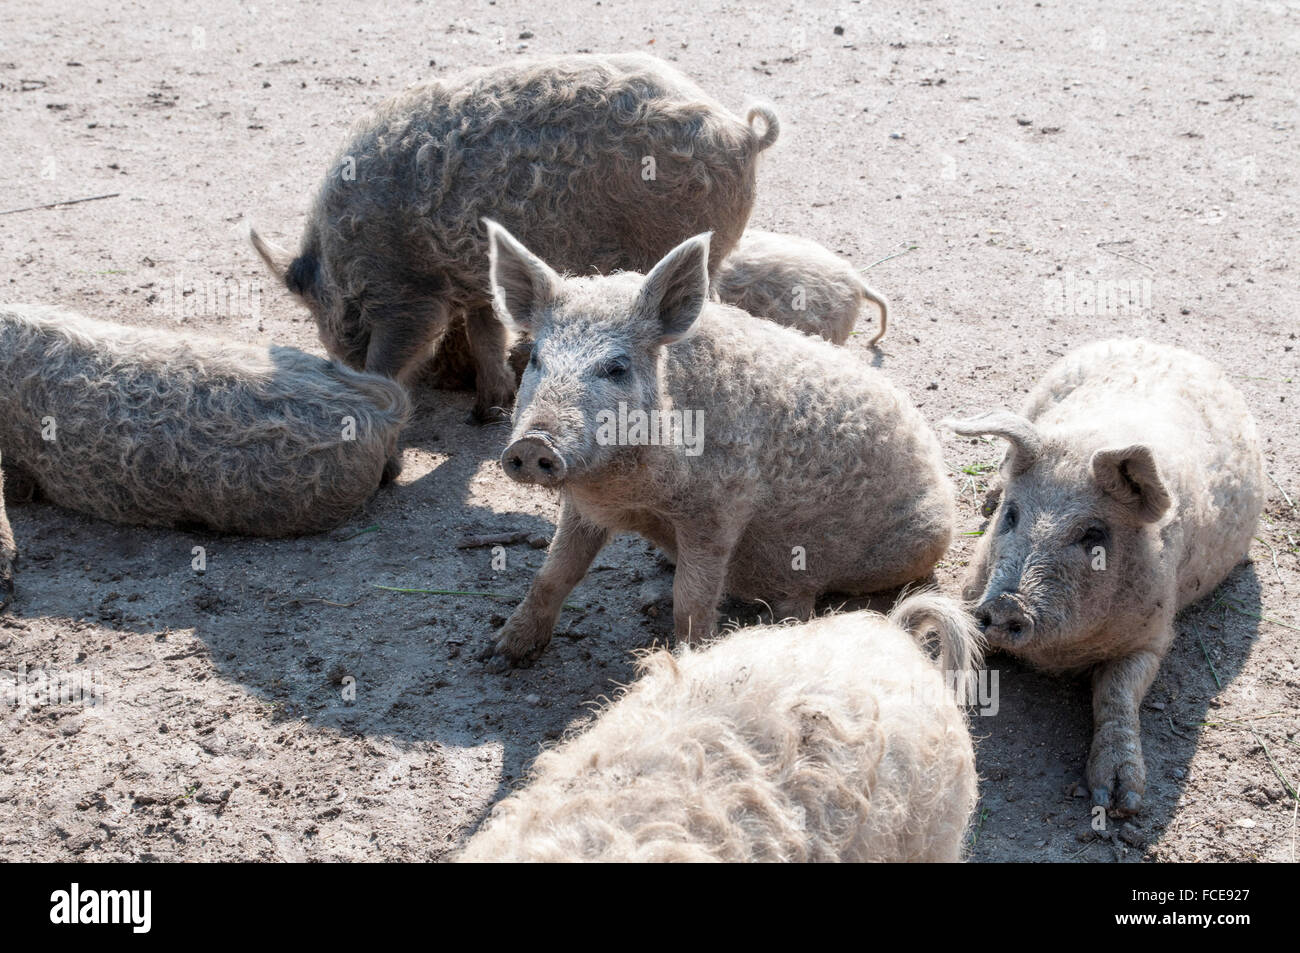 Pigs in the sand, UNESCO World Heritage Site The Cultural Landscape Fertö-Lake Neusiedl, Hungary Stock Photo